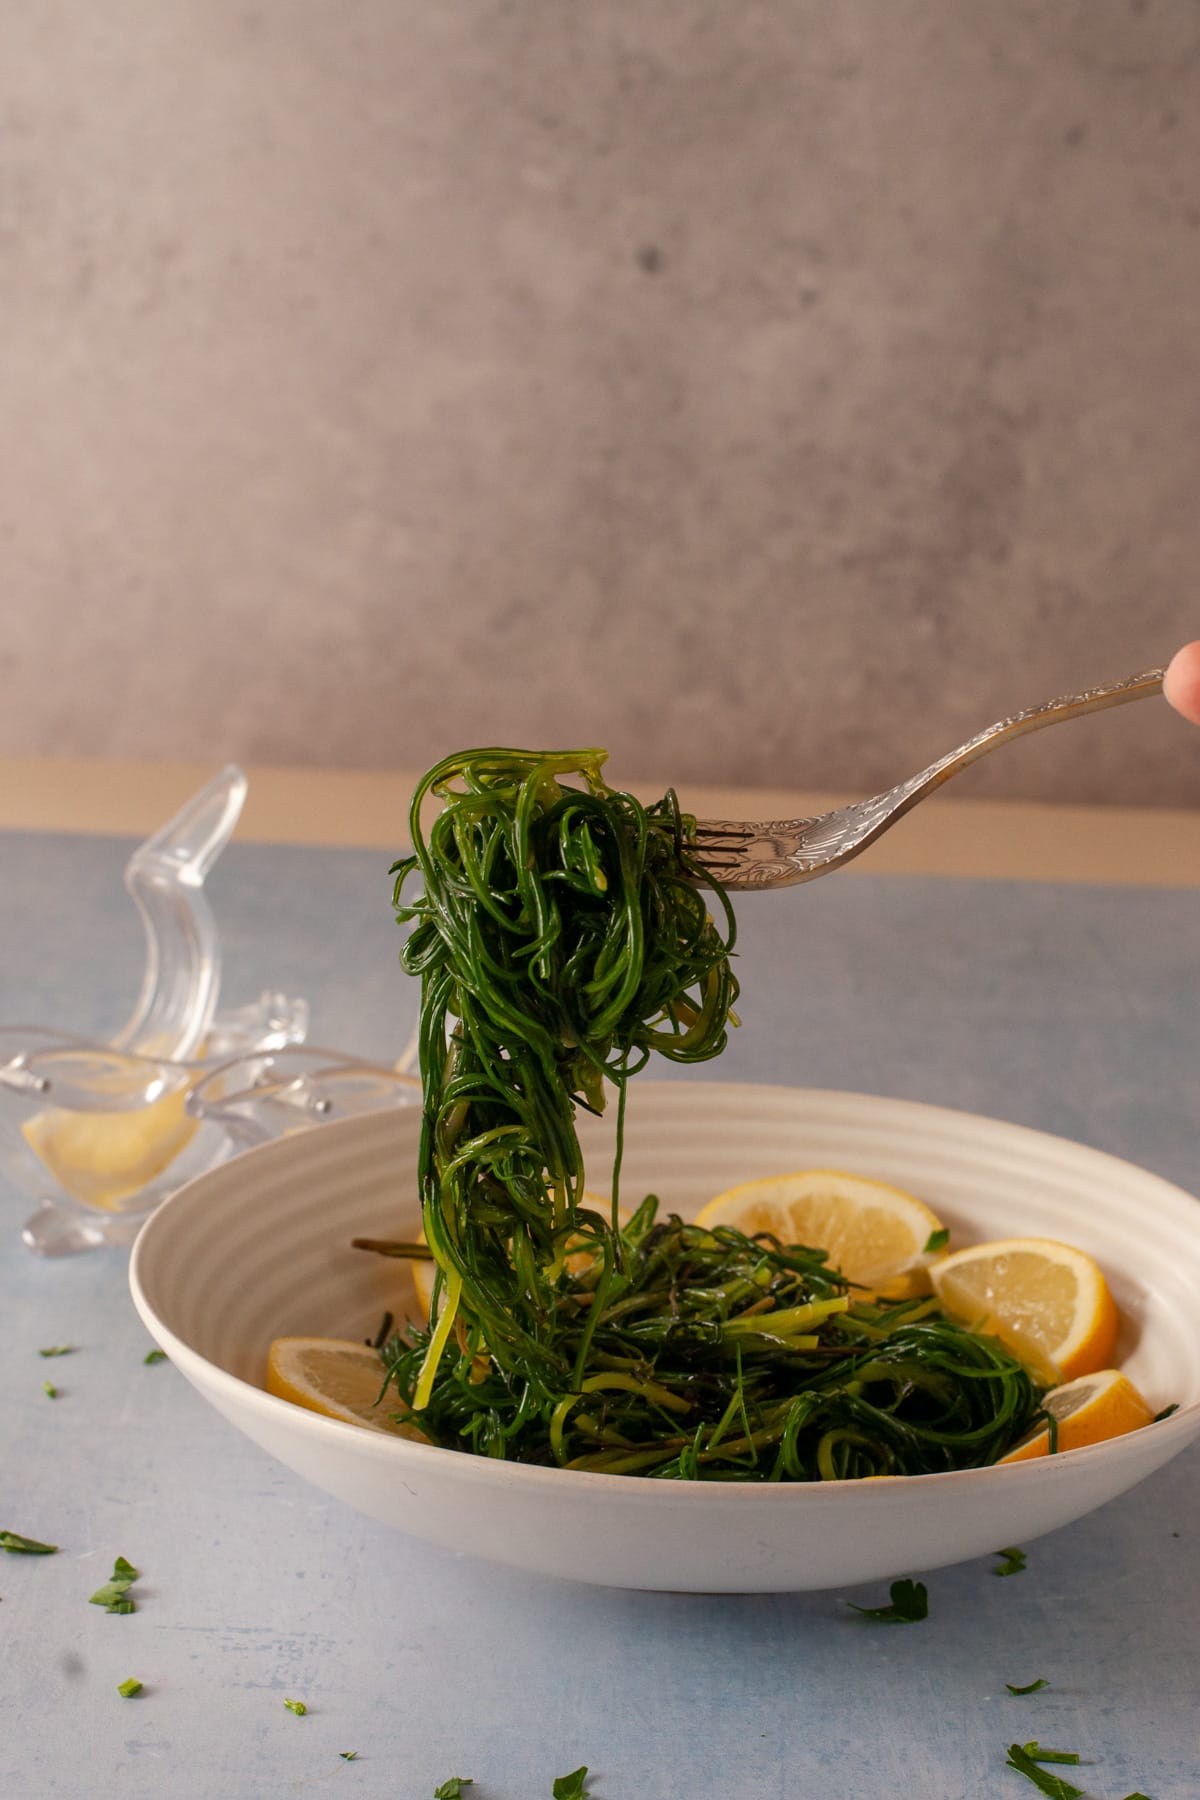 agretti lifted up with a fork